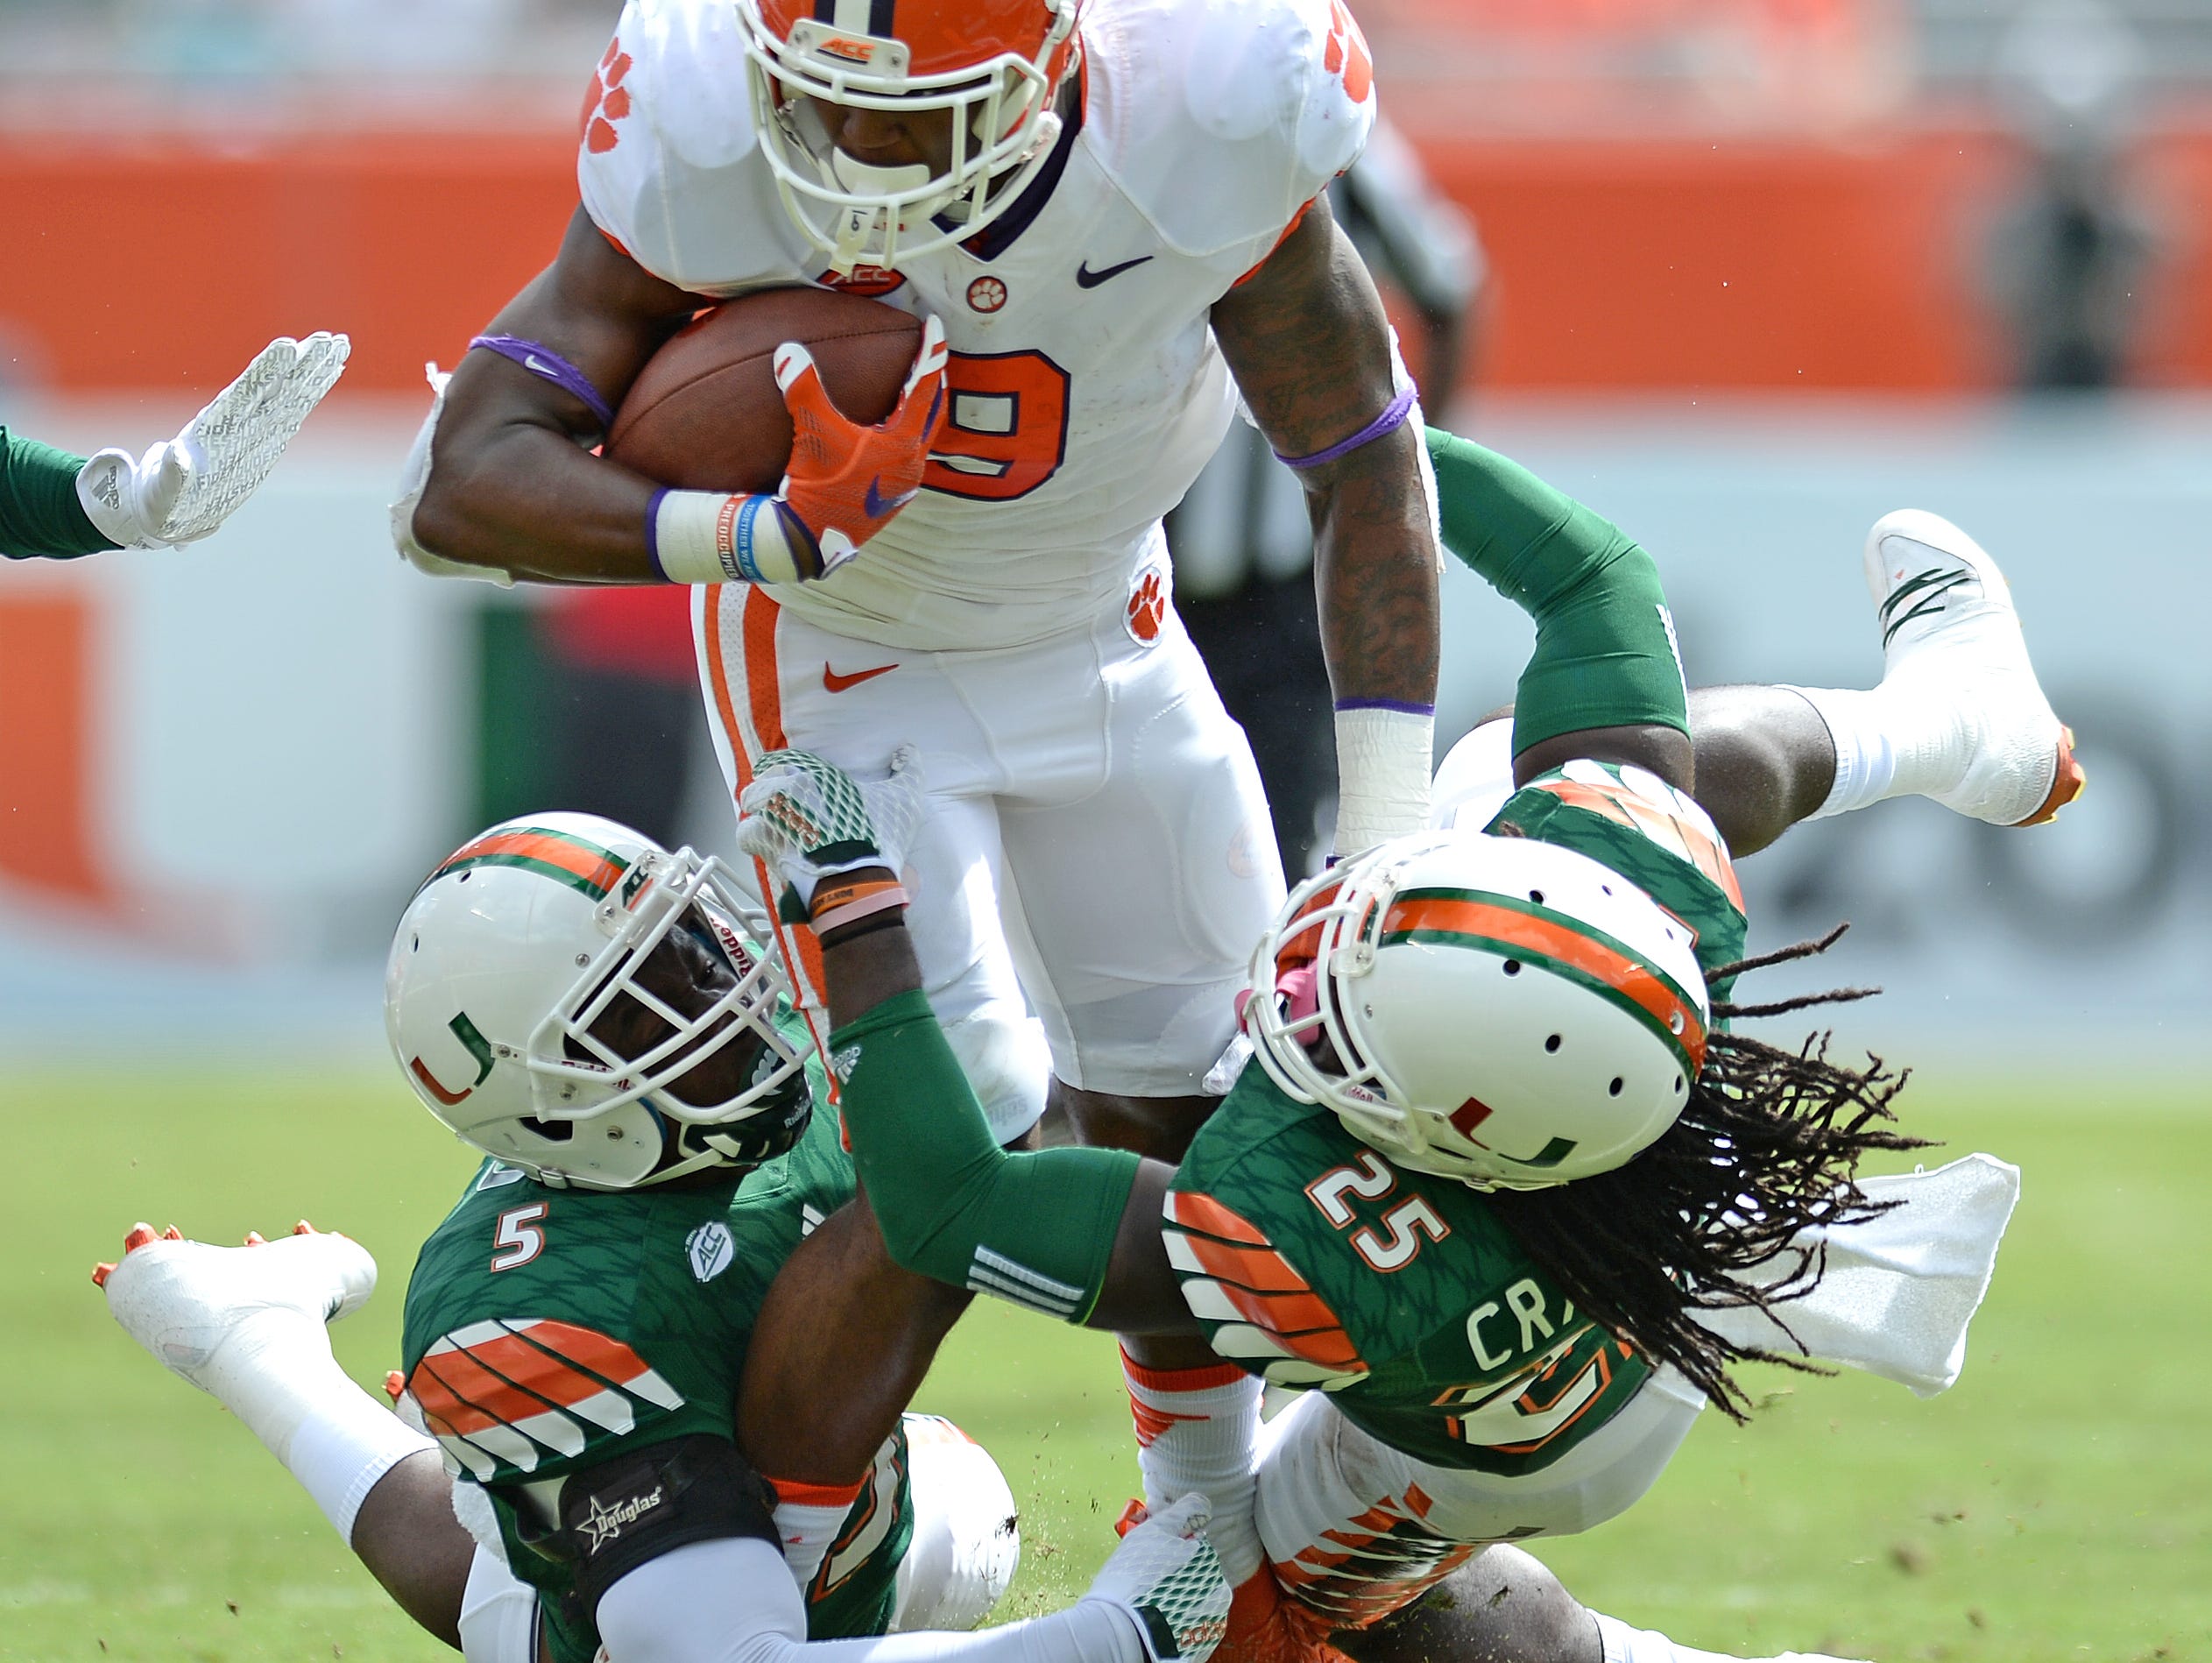 Miami linebacker Jermaine Grace (5), left, and defensive back Dallas Crawford (25) try to bring down Clemson running back Wayne Gallman (9) during the 1st quarter Saturday, Oct. 24, 2015, in Miami Gardens, Fla.